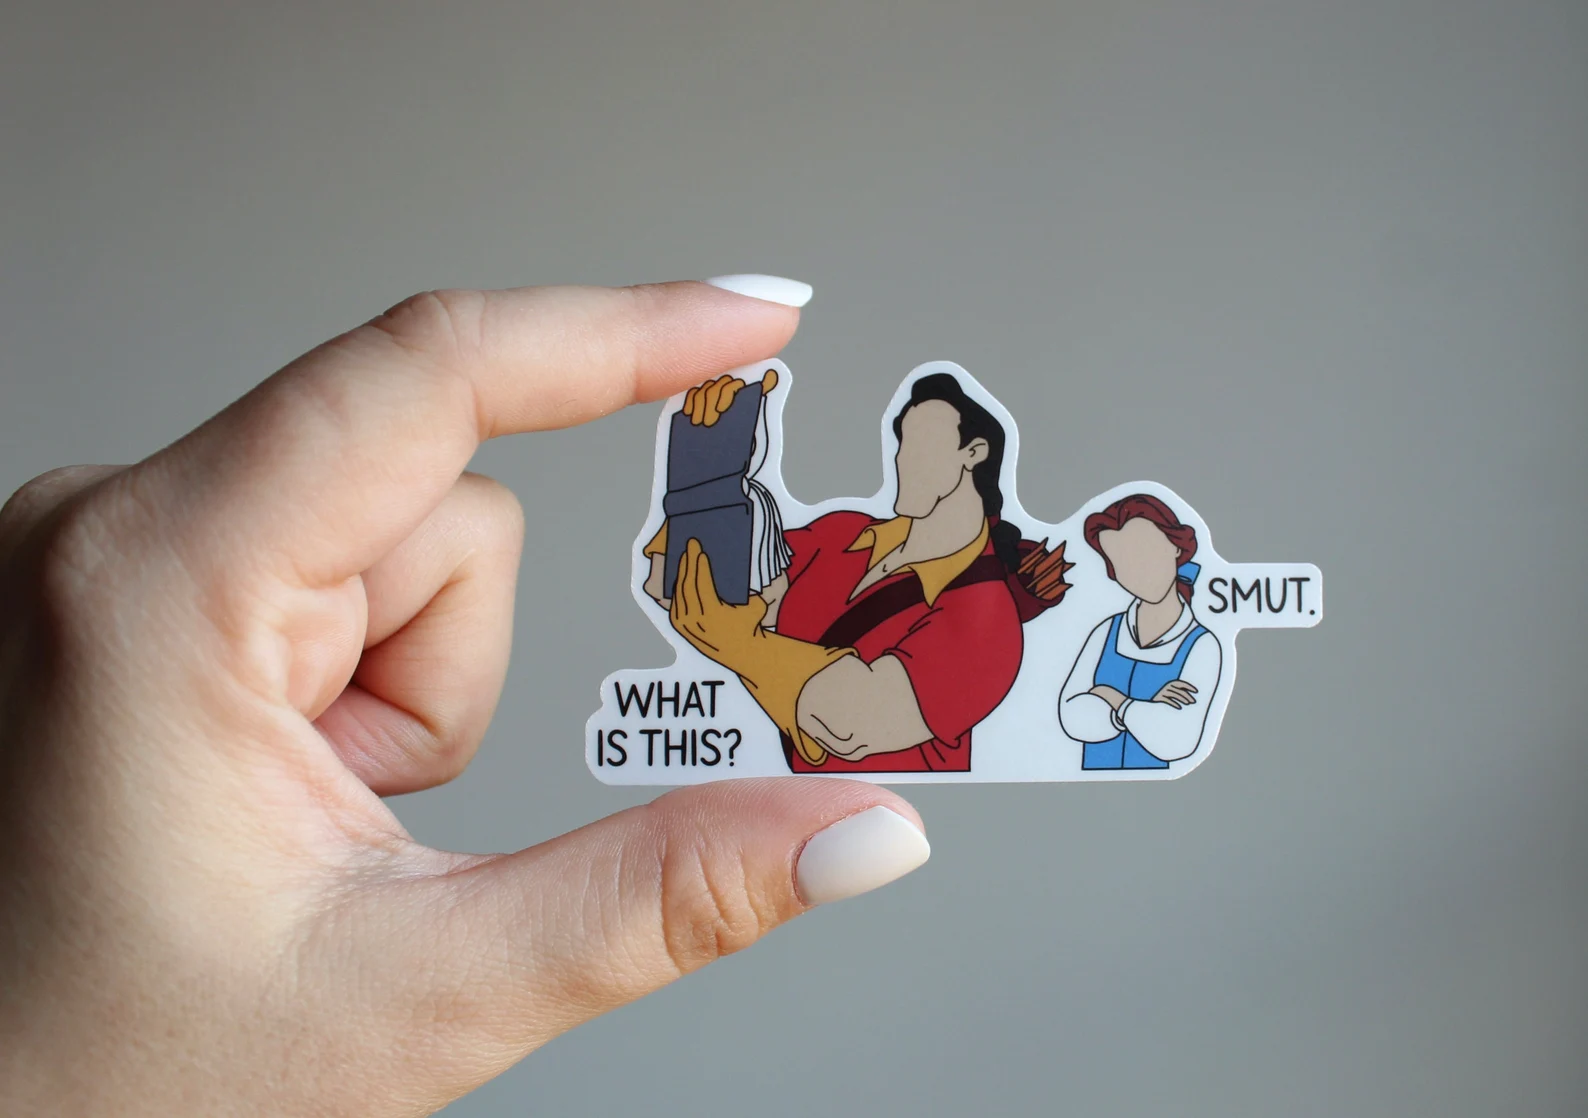 a sticker of Gaston holding up a book and asking "What is this?" and Belle responding, "Smut."